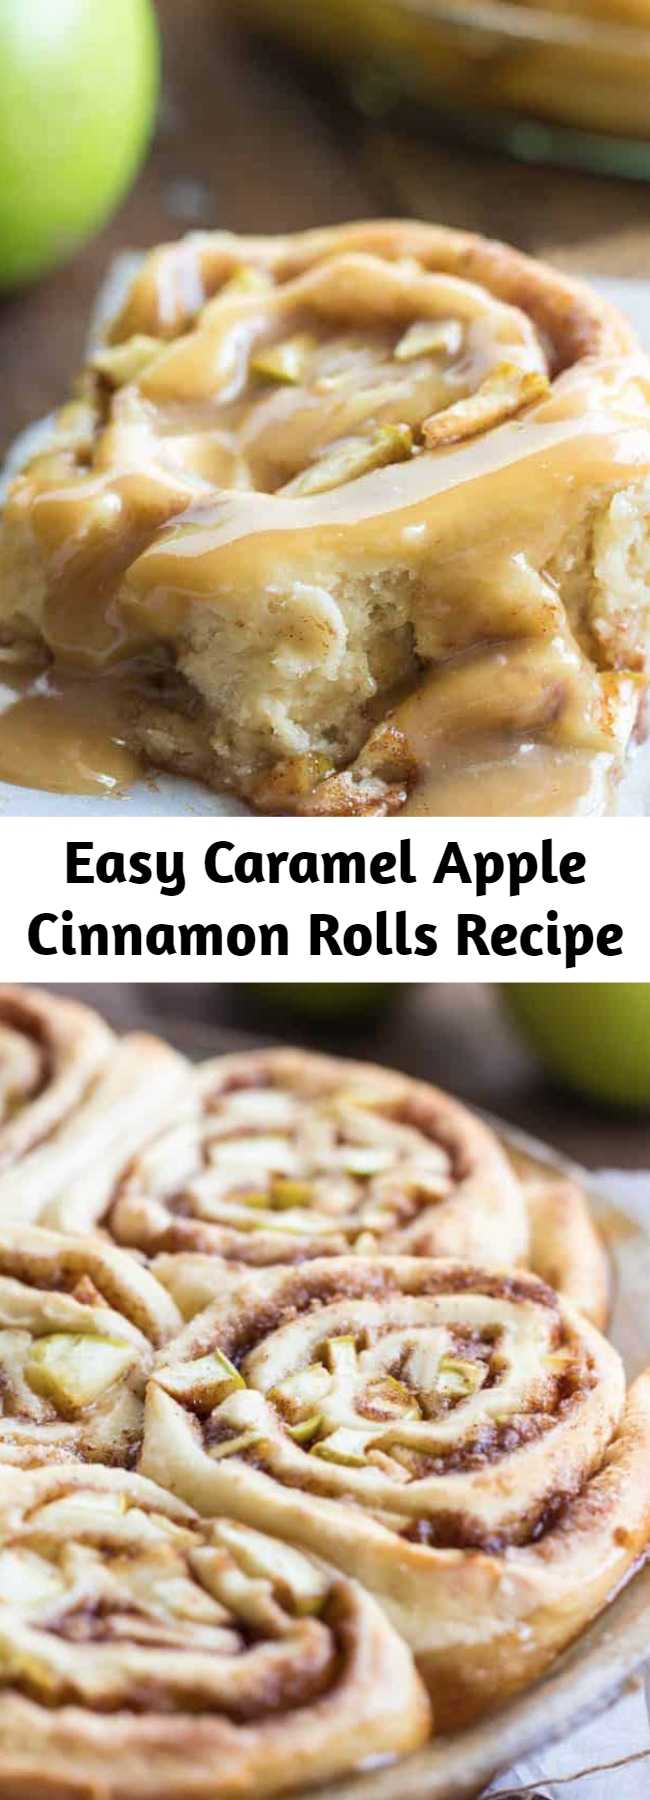 Easy Caramel Apple Cinnamon Rolls Recipe - Caramel Apple Cinnamon Rolls are a quick and easy cinnamon roll stuffed with real apples and drizzled with caramel. Ready within an hour!